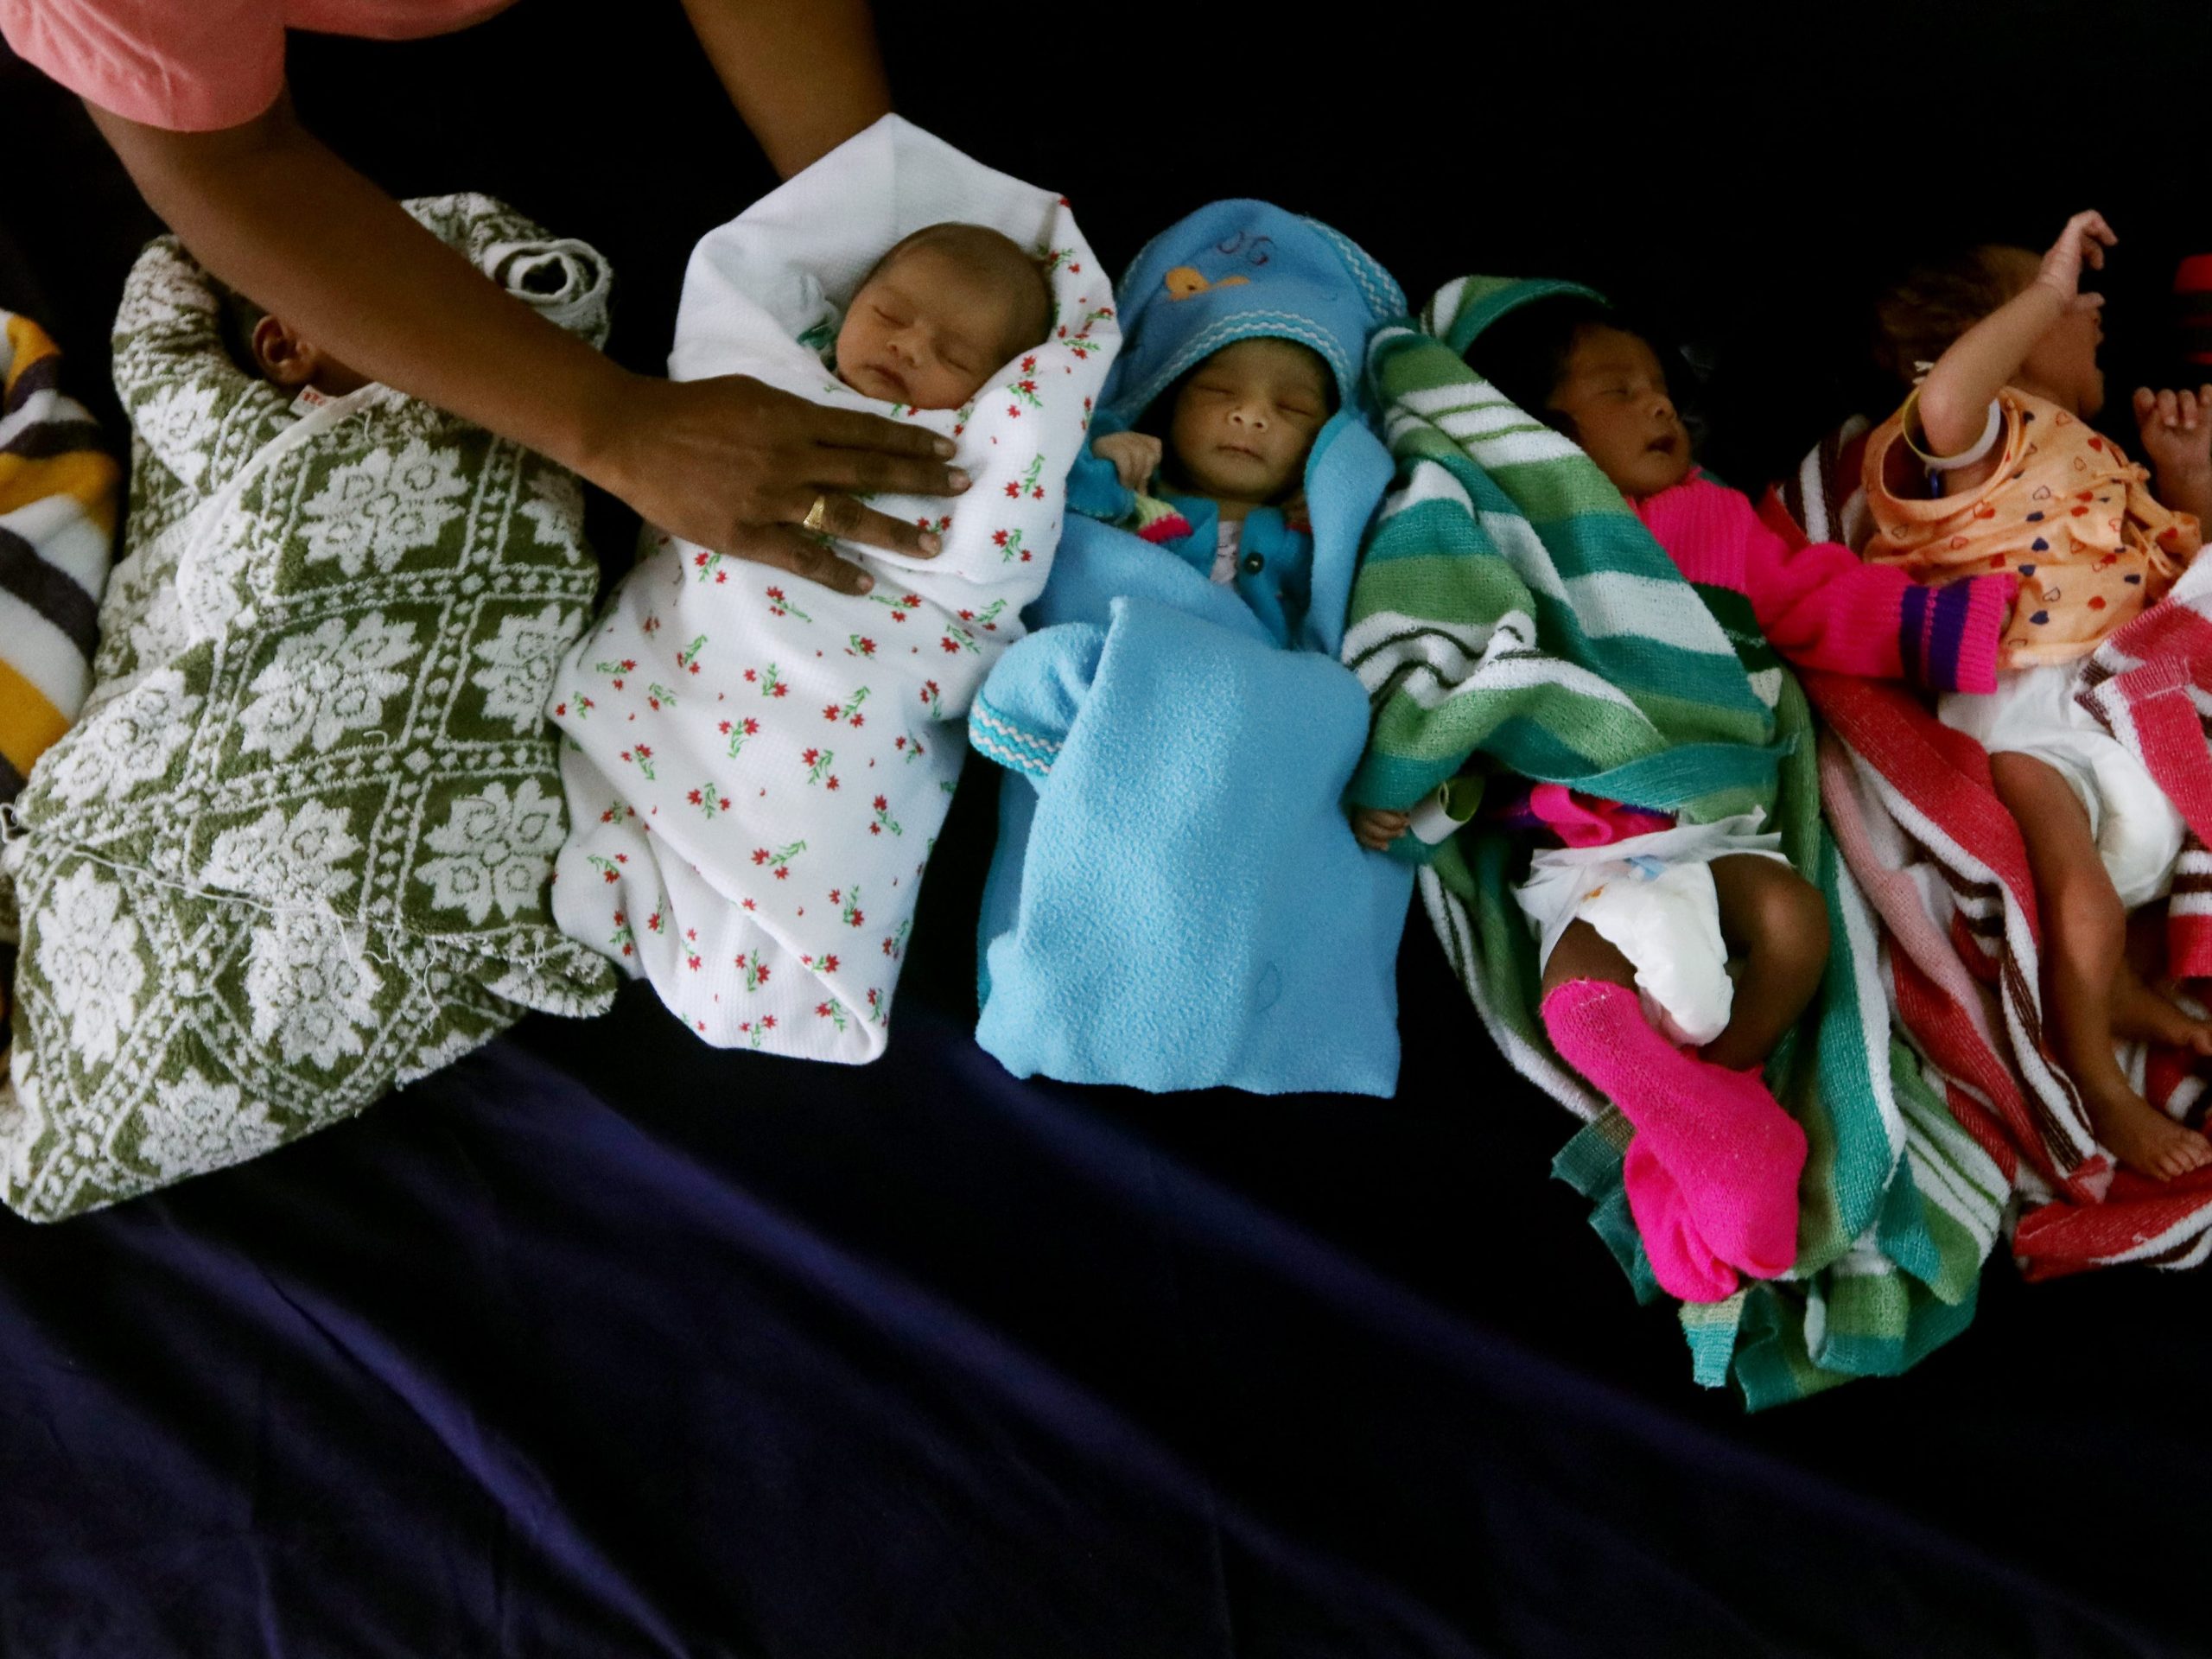 Newly born babies rest inside a ward on the occasion of World Population Day at Government Children's Hospital in Chennai, India.